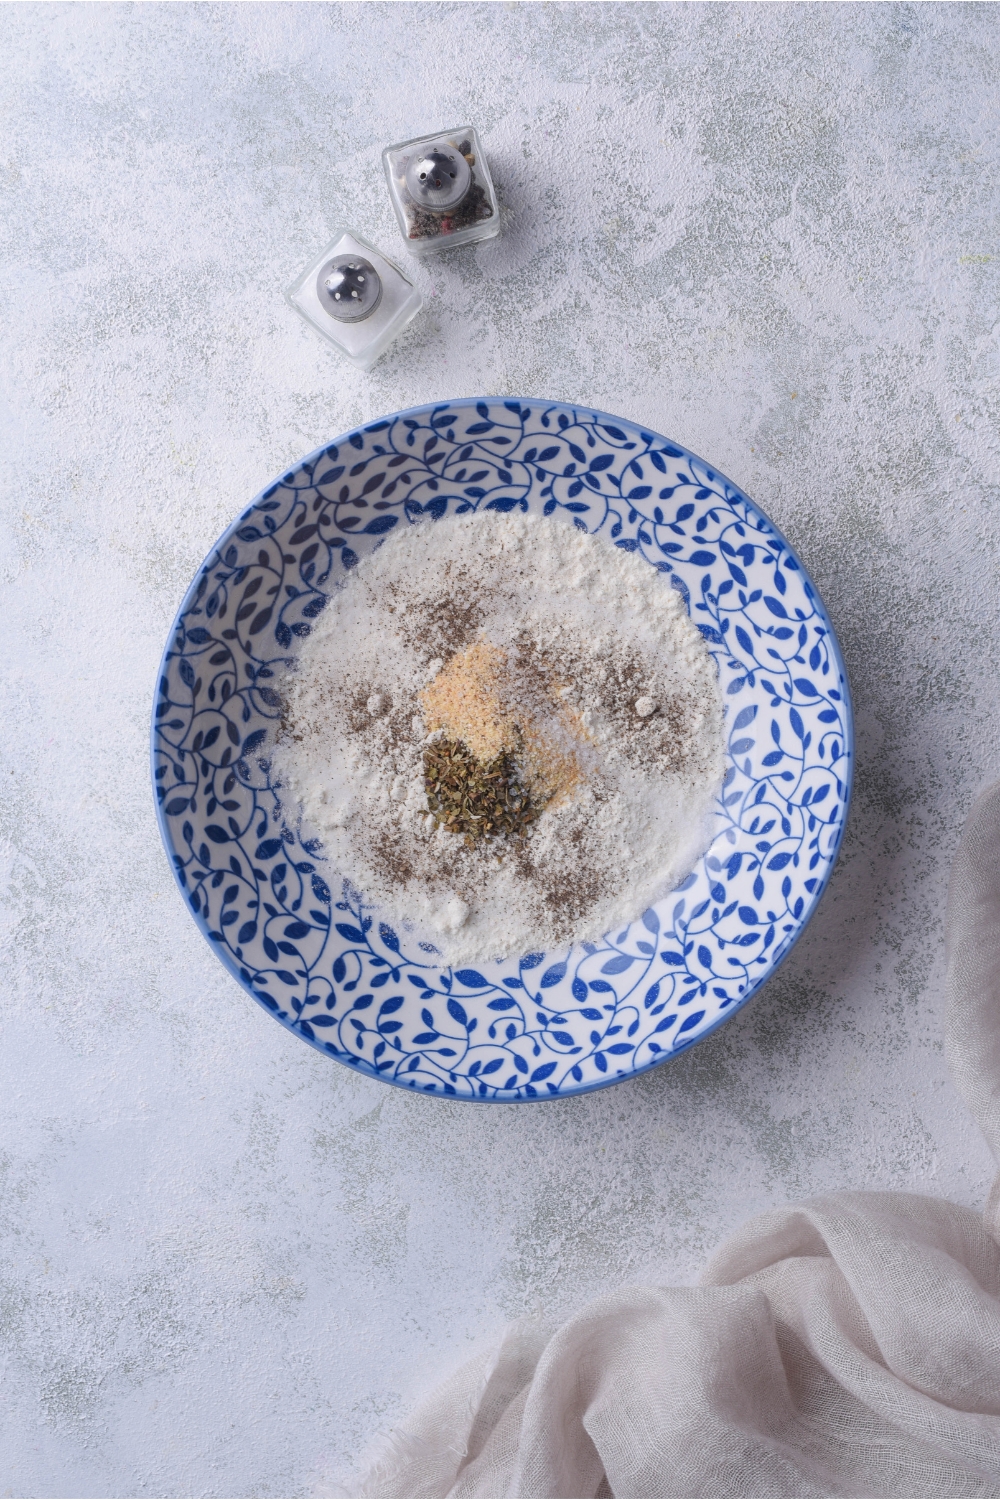 A white and blue decorative bowl with flour and a mixture of spices that have not been fully combined.